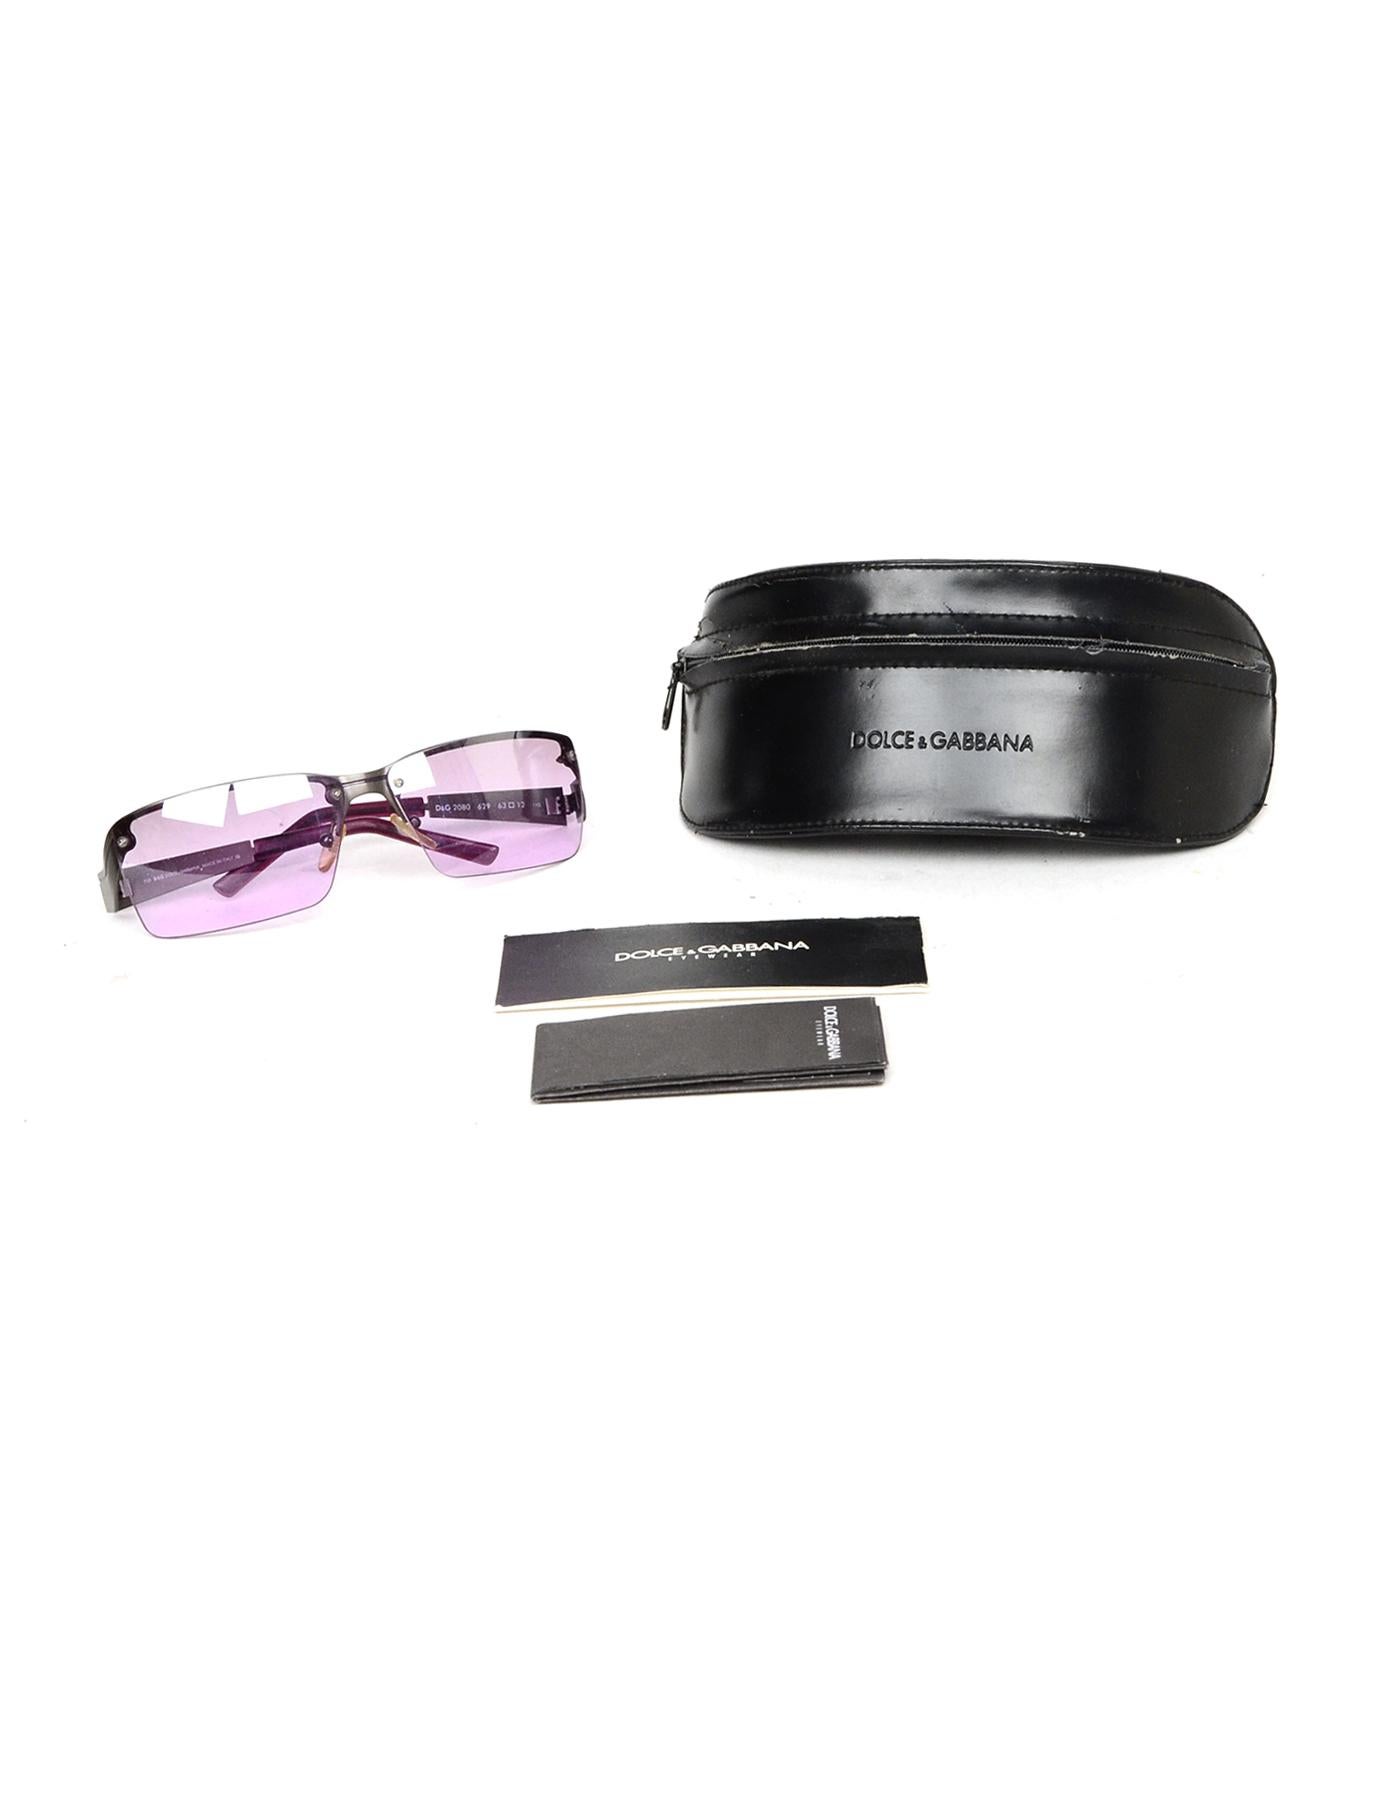 Dolce & Gabbana Vintage Purple Lens Sunglasses

Made In: Italy 
Year of Production: Vintage
Color: Purple, gunmetal
Hardware: Gunmetal
Materials: Metal
Overall Condition: Excellent vintage, pre-owned condition with exception of minor marks in lenses